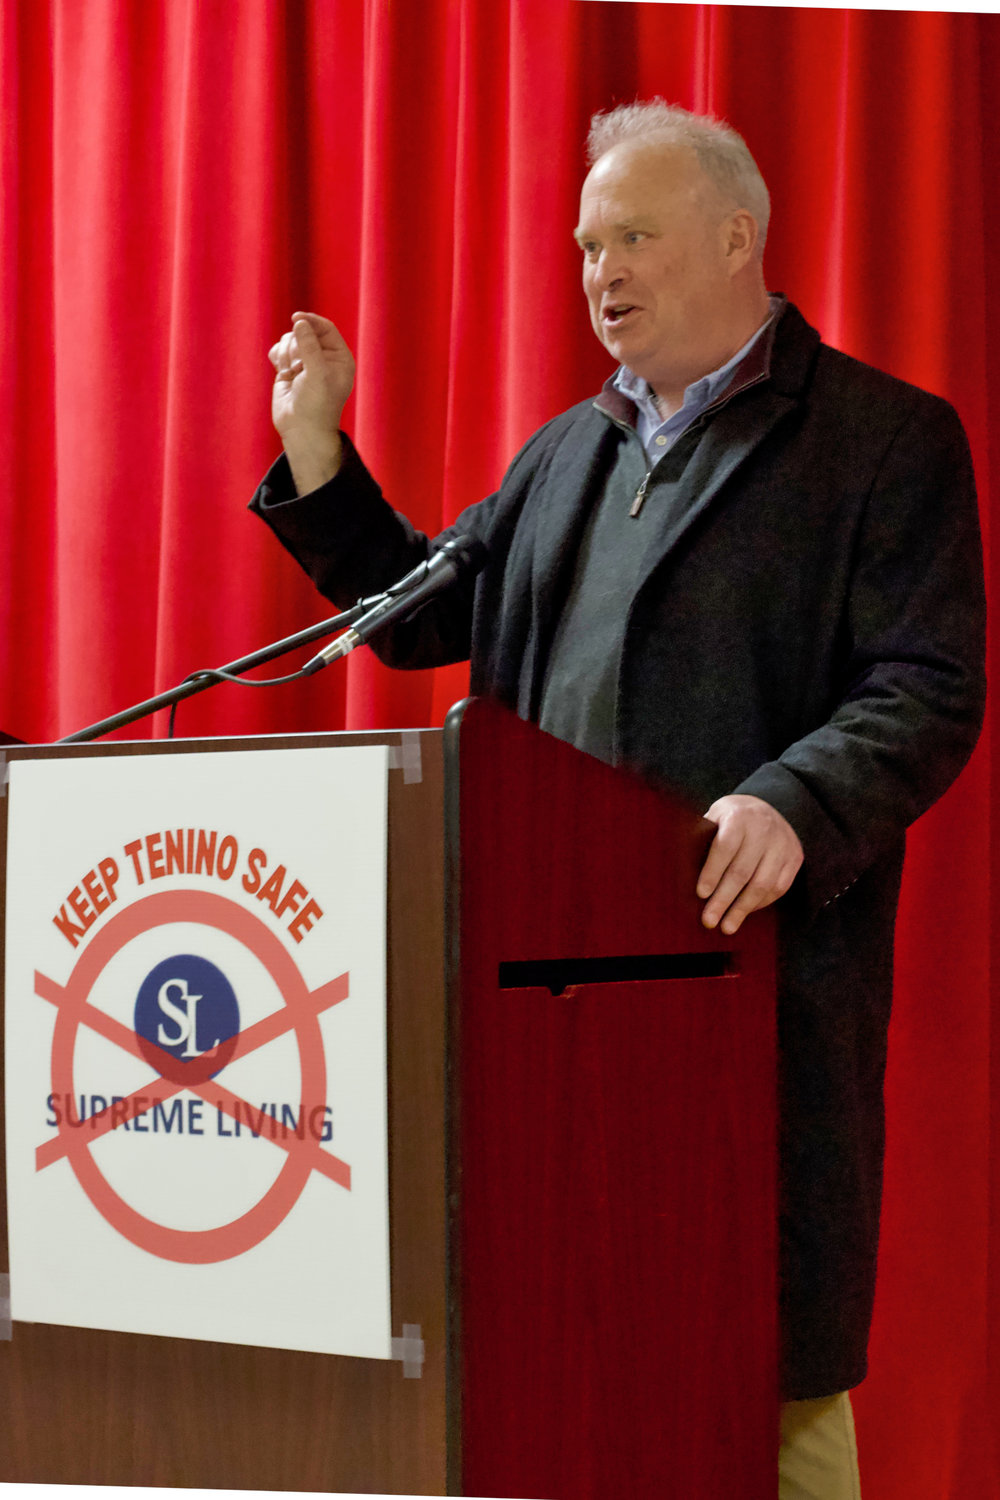 Rep. Jim Walsh speaks during a community meeting at Tenino High School on Sunday where residents gathered to discuss plans to oppose a Supreme Living-run Less Restrictive Alternative facility for sex offenders.